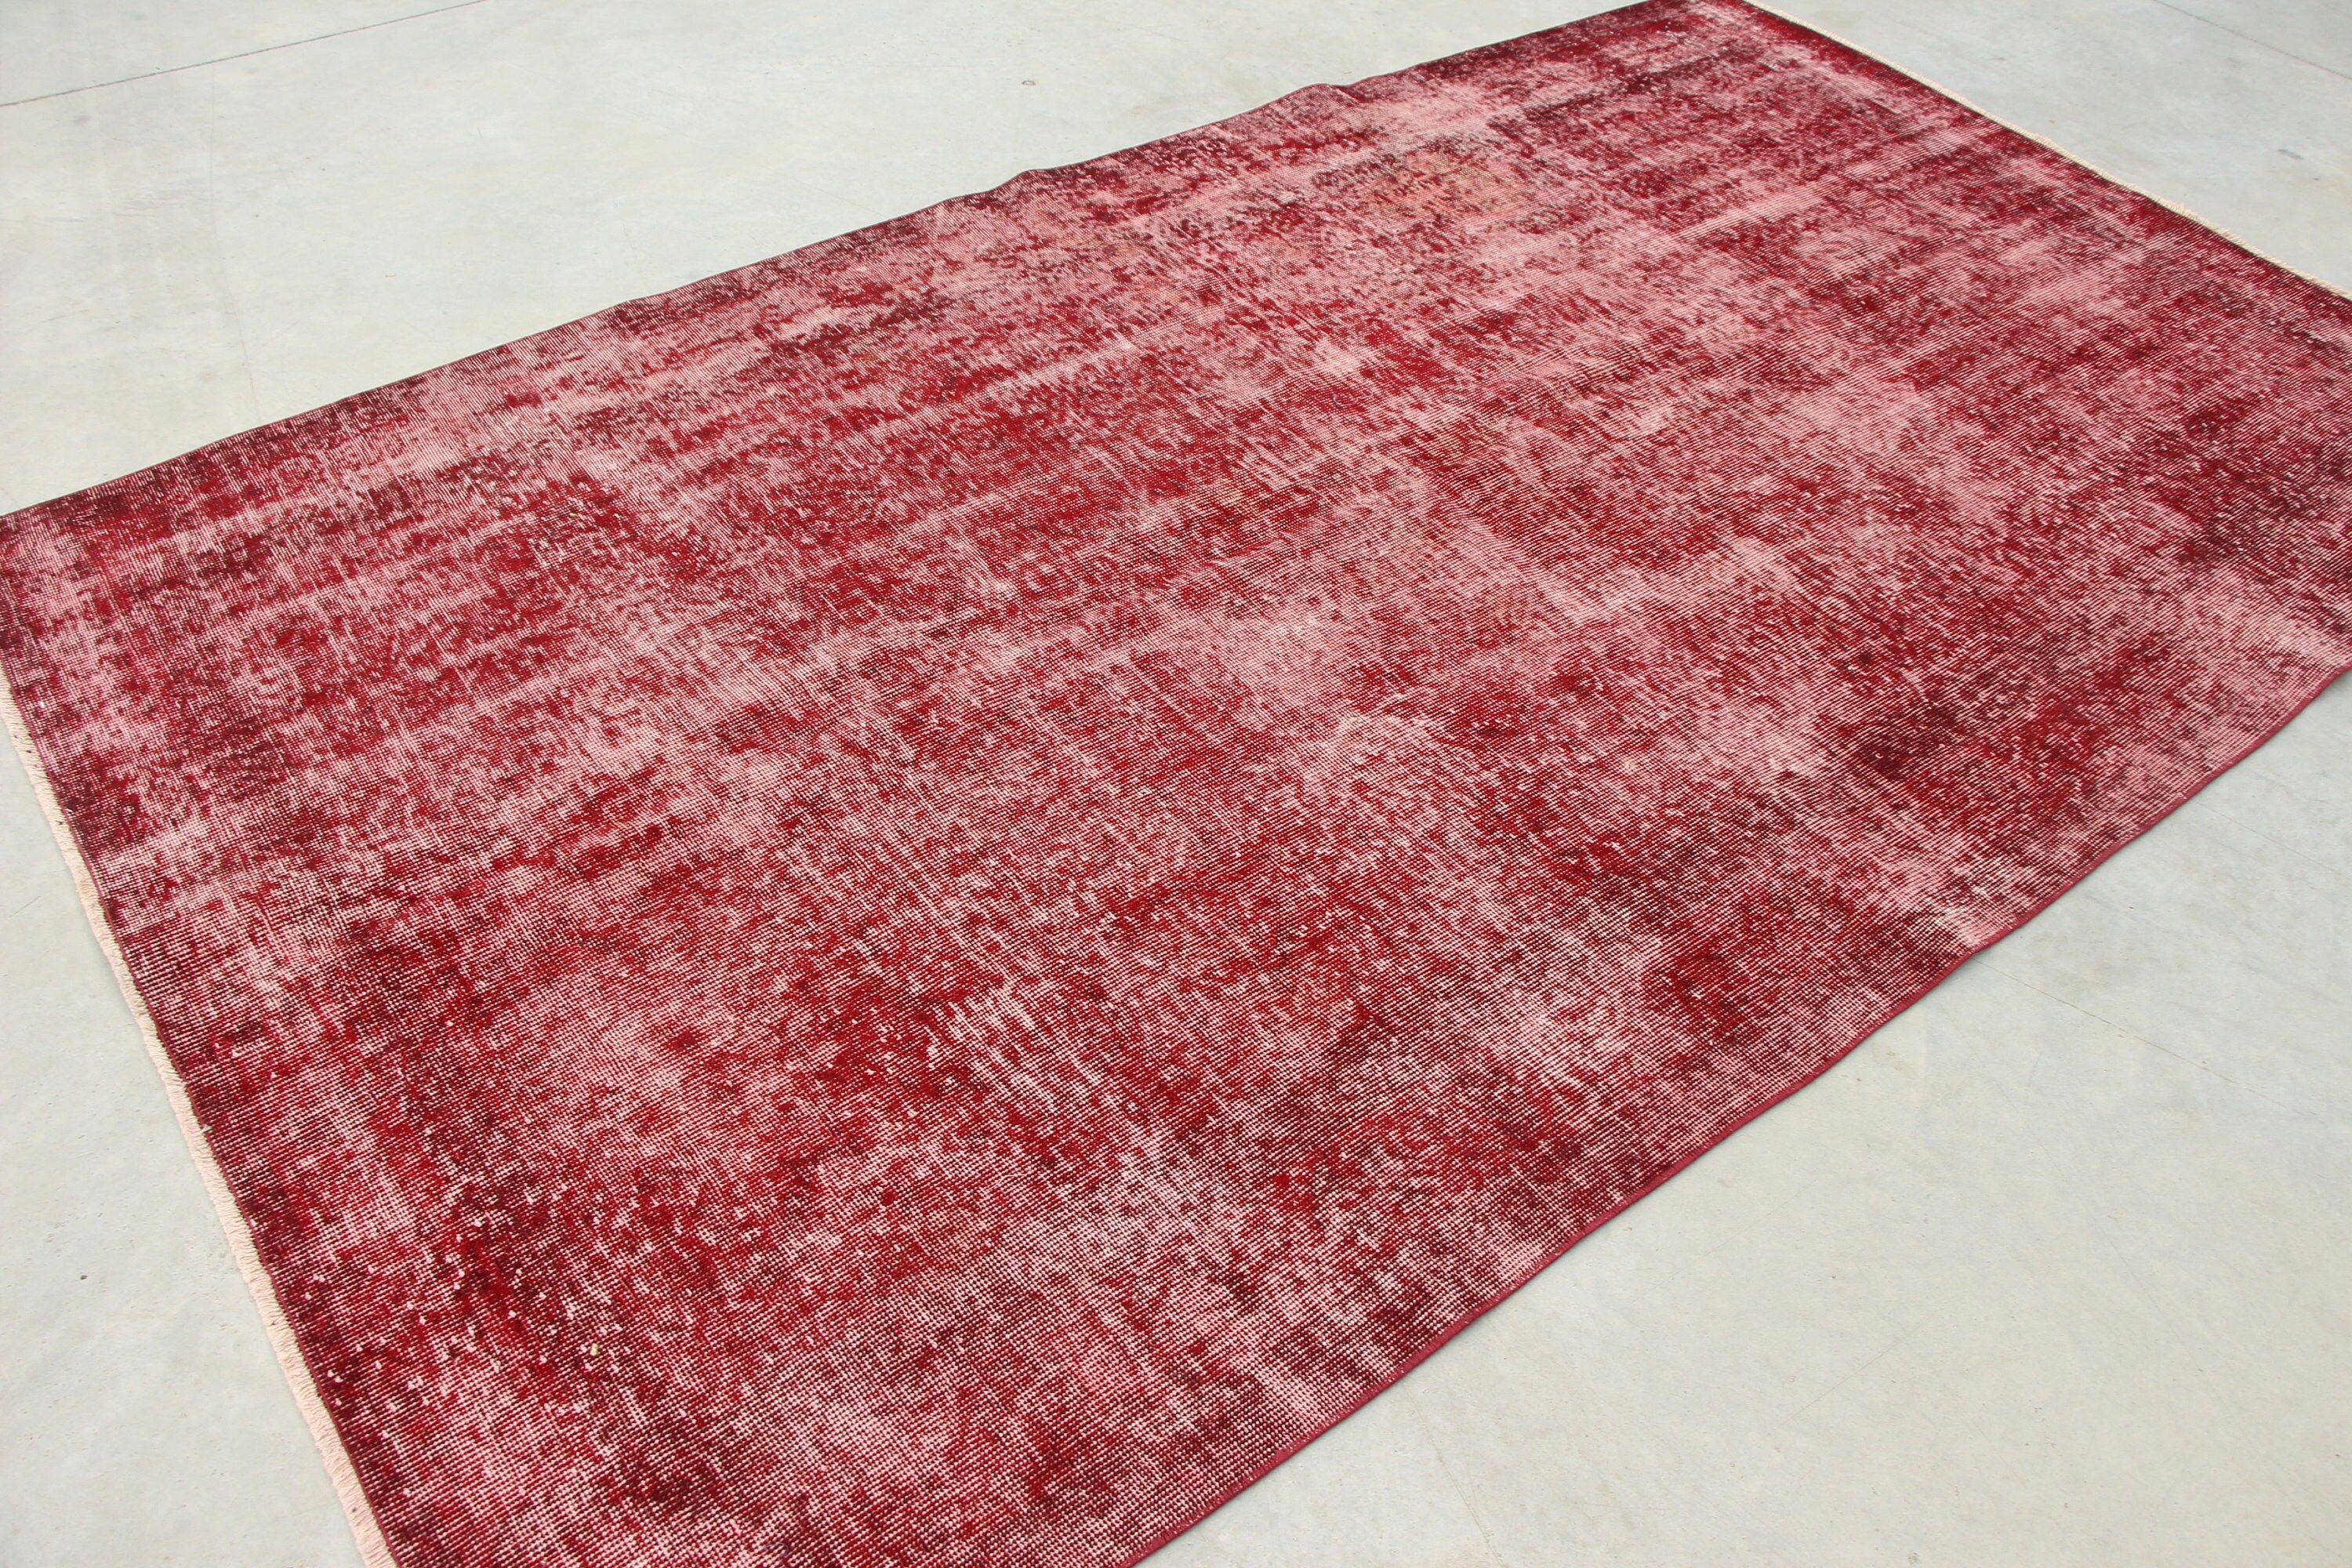 Antique Rugs, Rugs for Salon, Living Room Rug, Red Bedroom Rugs, 5.5x9.2 ft Large Rugs, Kitchen Rug, Turkish Rugs, Salon Rugs, Vintage Rug